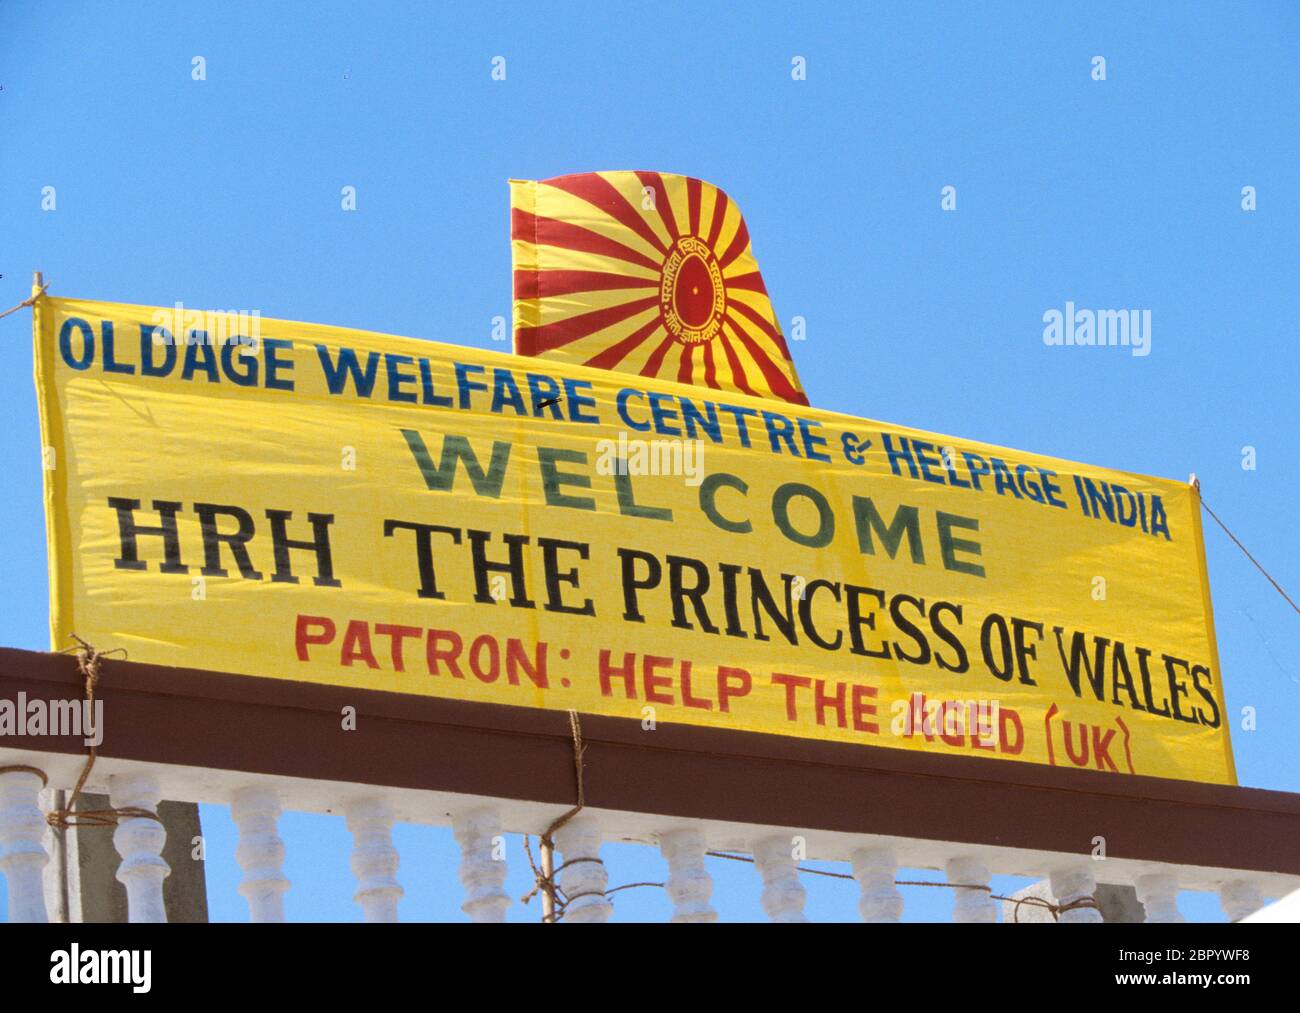 Welcome sign for HRH Princess of Wales, Princess Diana during her Royal tour of India February 1992. Old age welfare centre and help age India. Help t Stock Photo